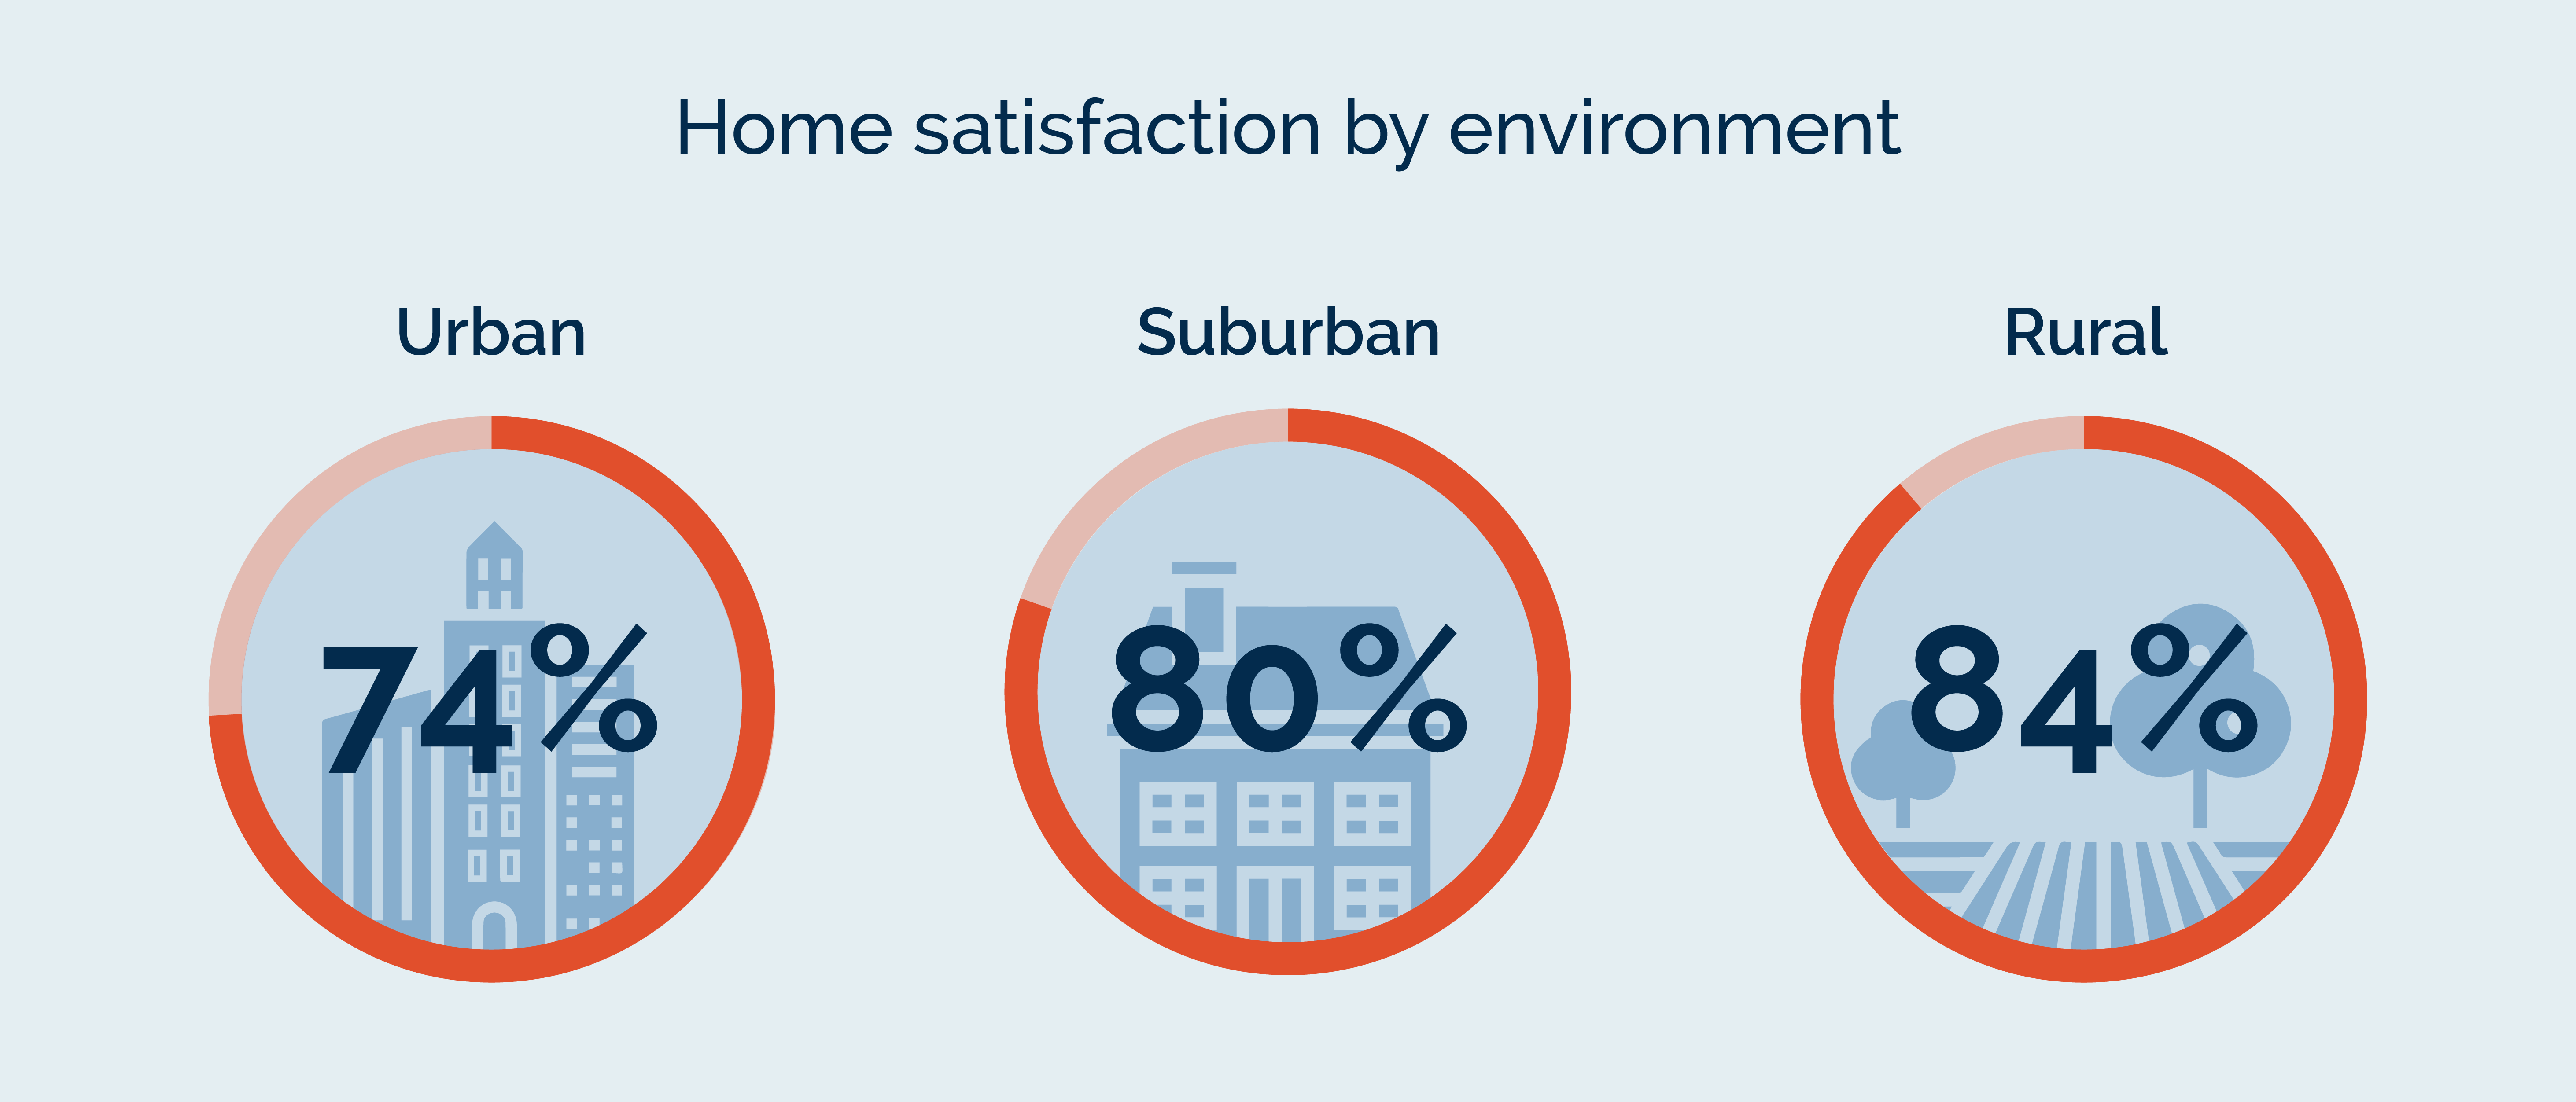 Home satisfaction by environment